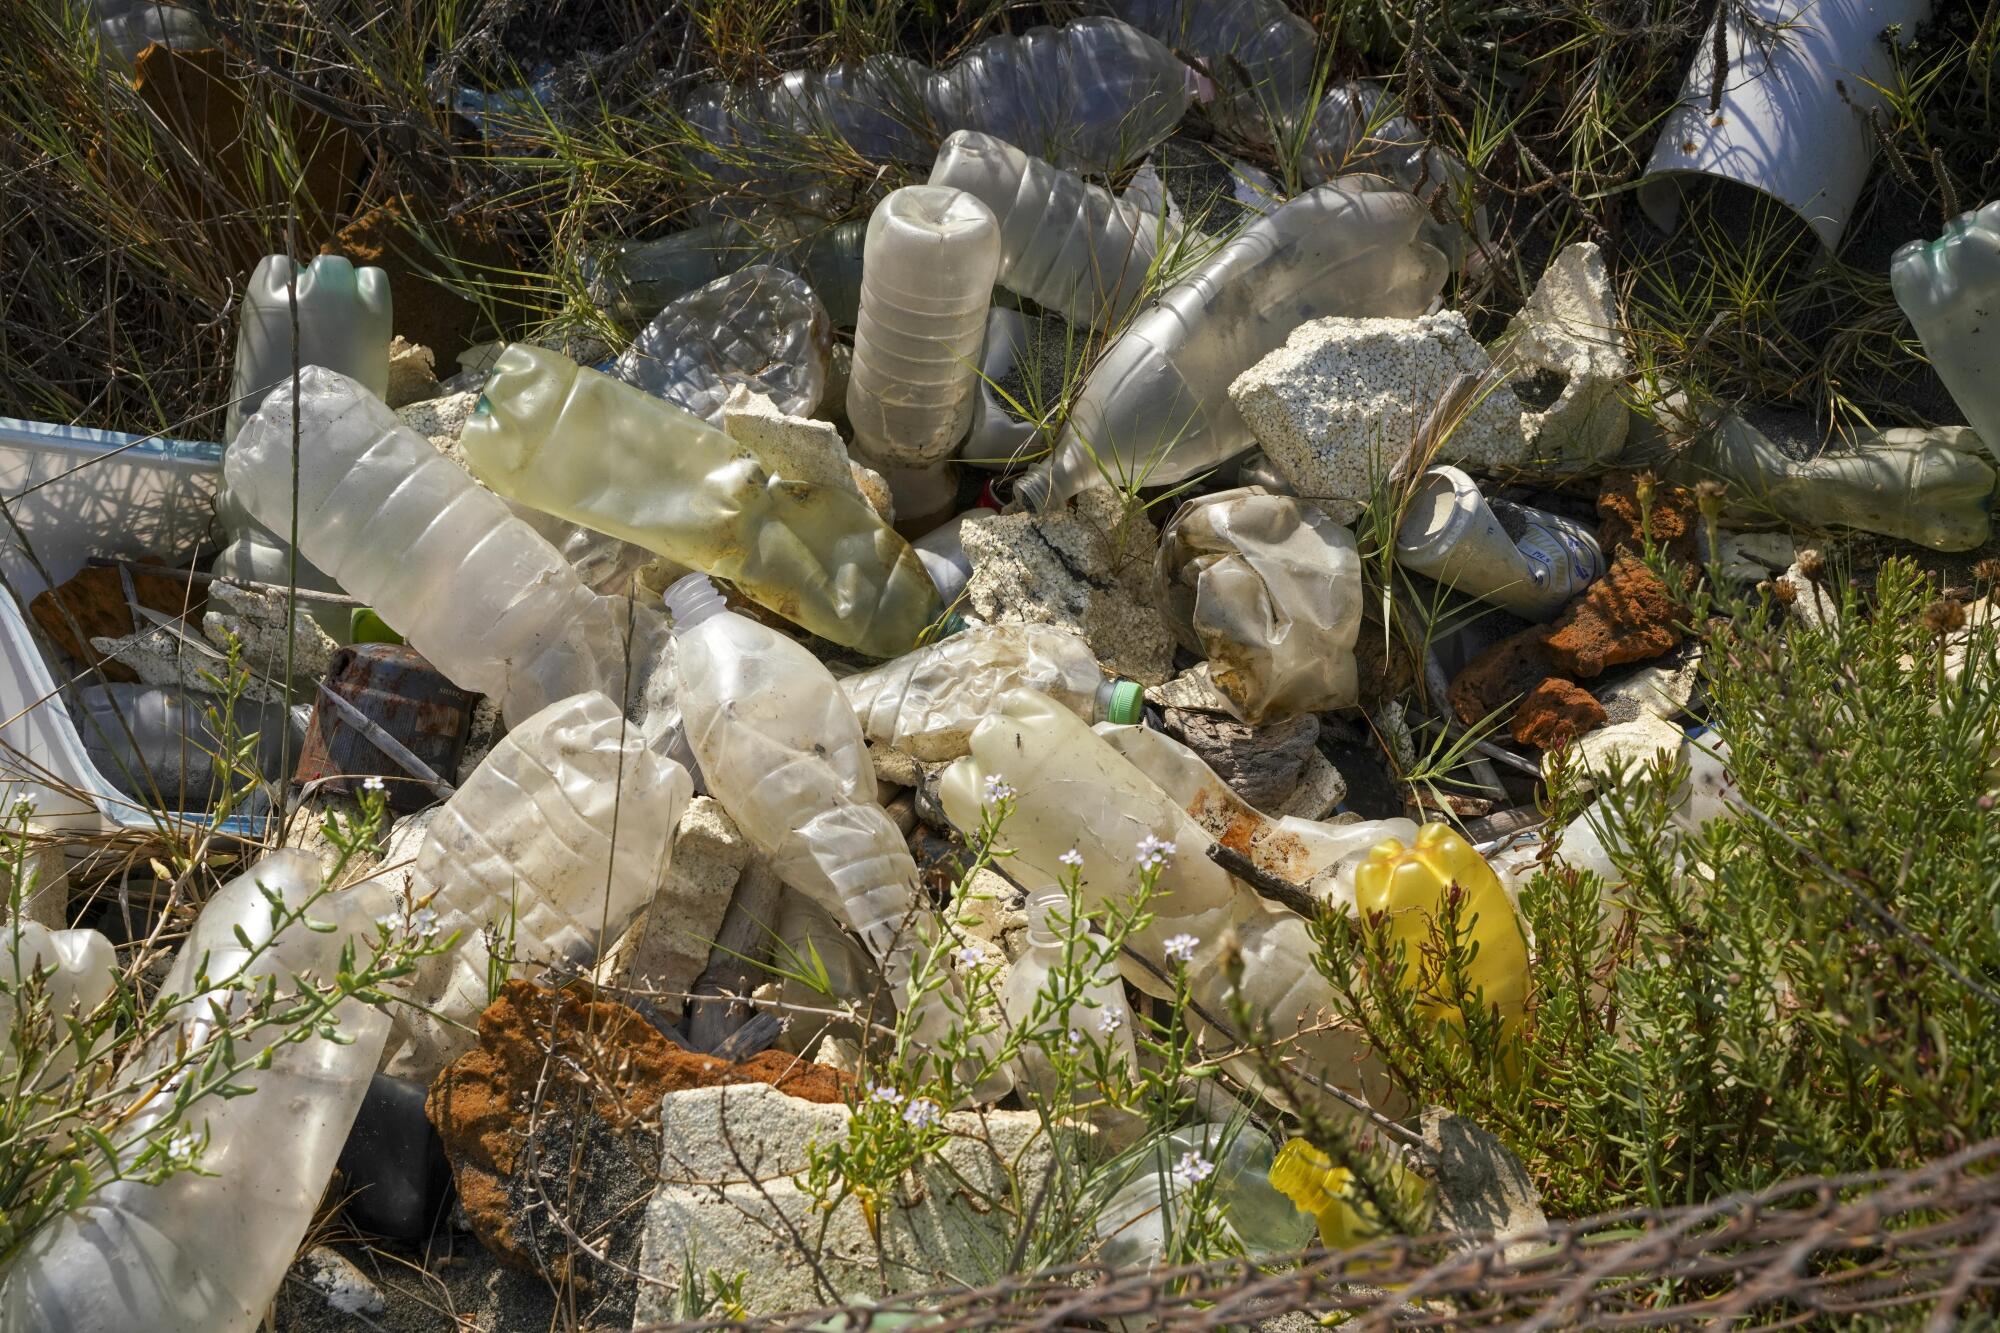 A pile of used plastic bottles.